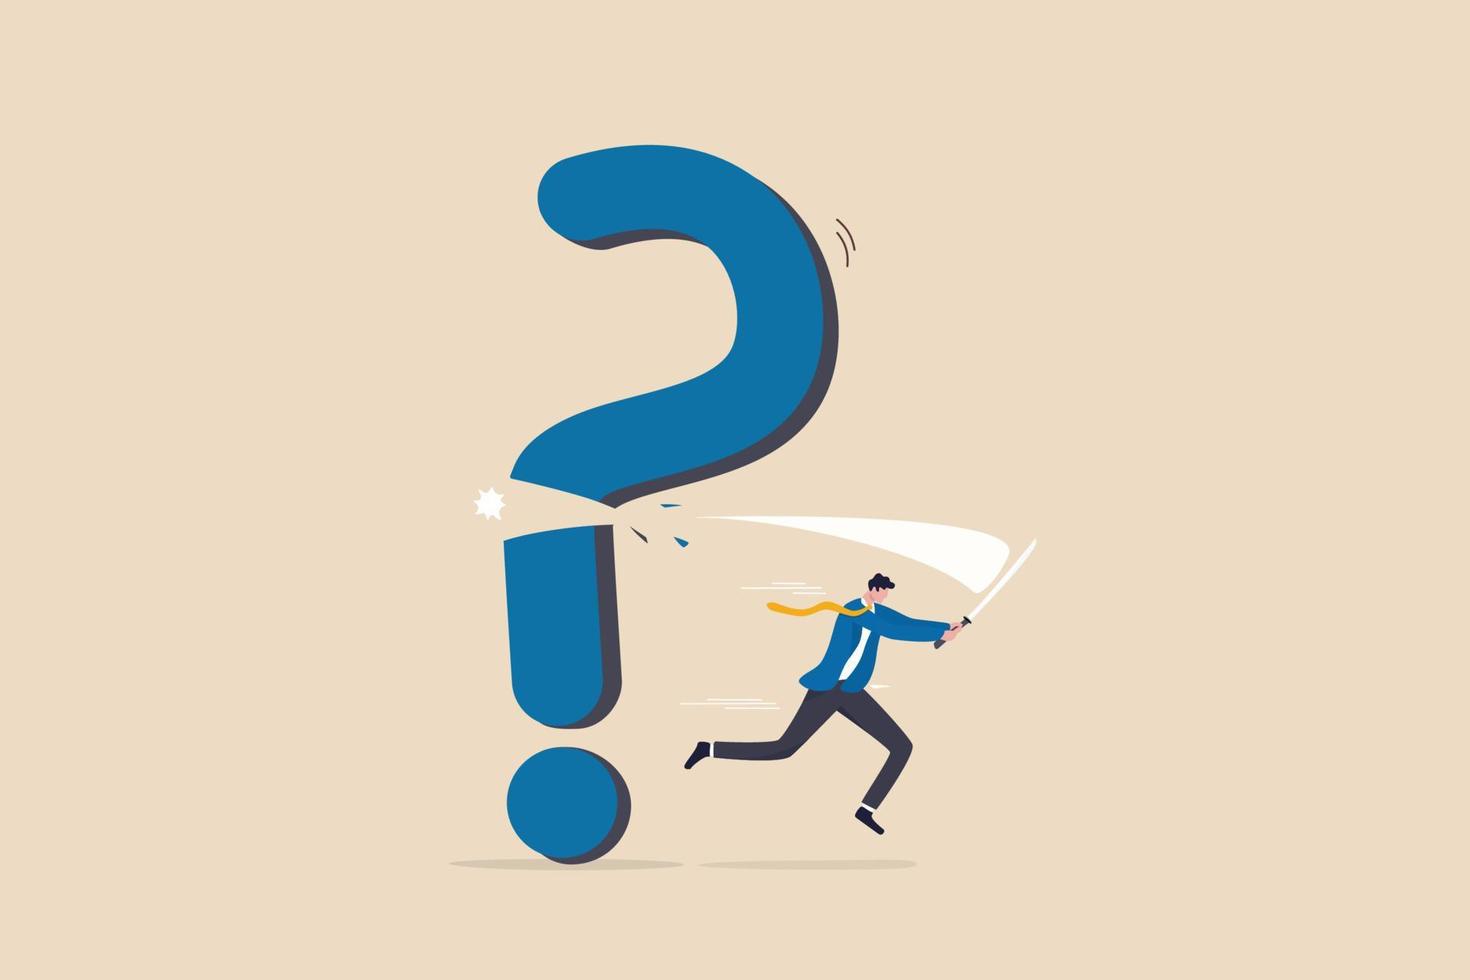 Solving problem, answer question or overcome difficulty, solution to eliminate trouble, unknown concept, confidence businessman cut question mark sign with his sword unveil exclamation mark as answer. vector